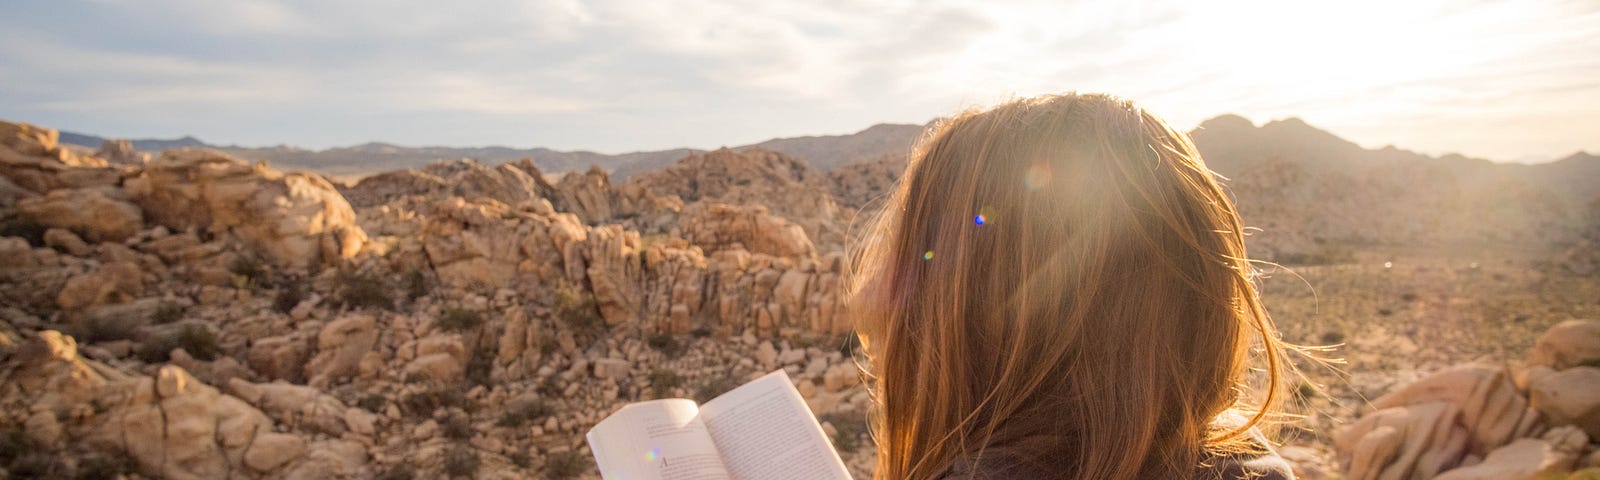 Image of woman reading in the mountains for 5 Books that Changed my Life 180°